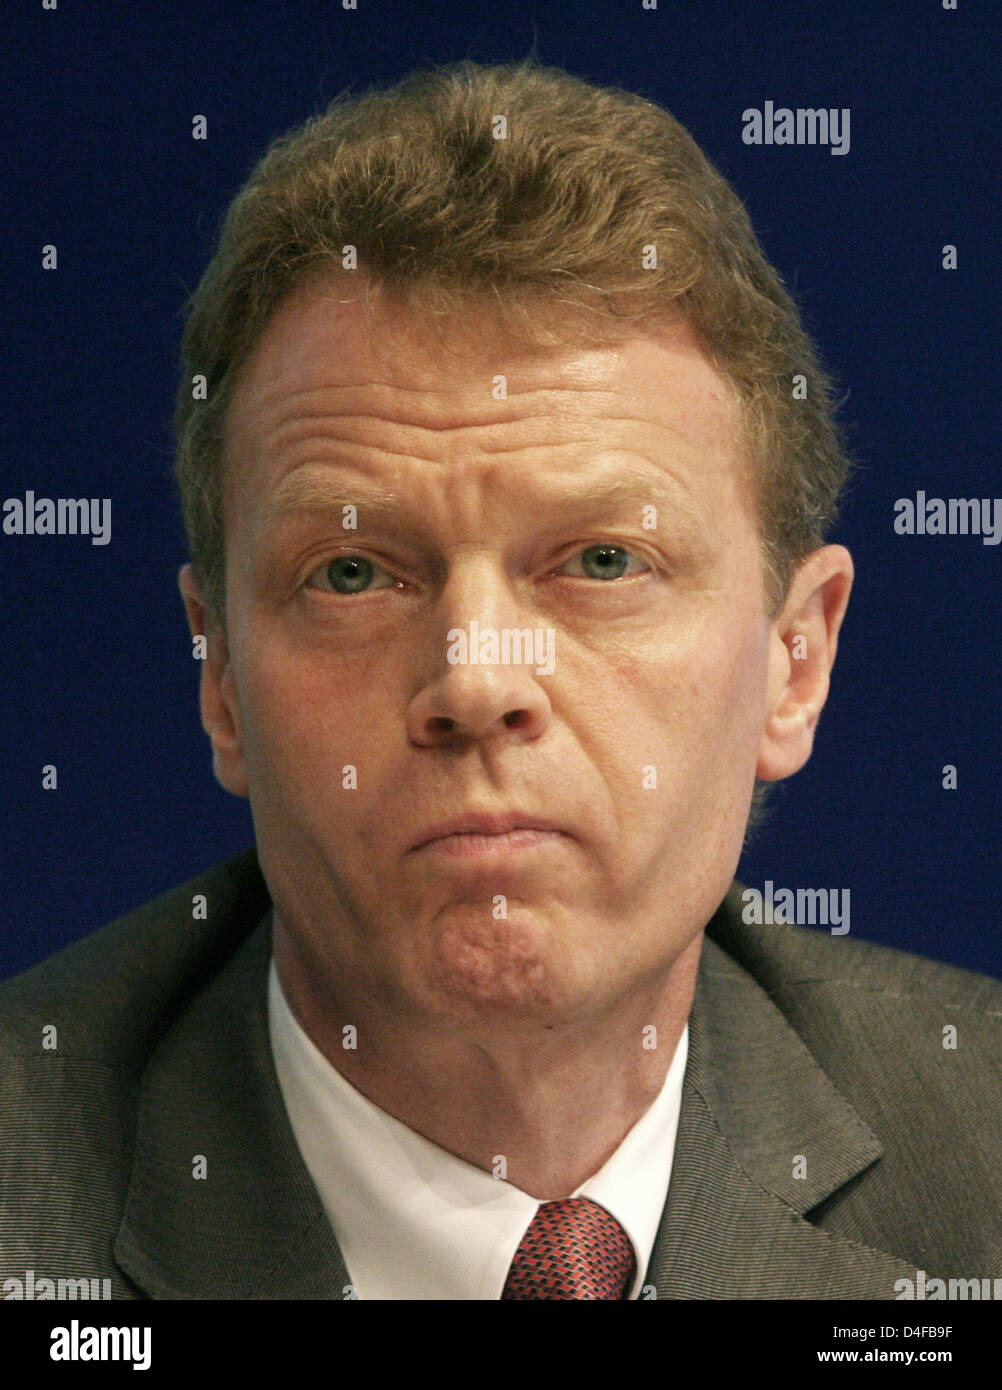 Hans-Juergen Niehaus, member of the board and chief financial officer of West LB, pictured at the company's balance press conference in Duesseldorf, Germany, 02 April 2008. Photo: Roland Weihrauch Stock Photo